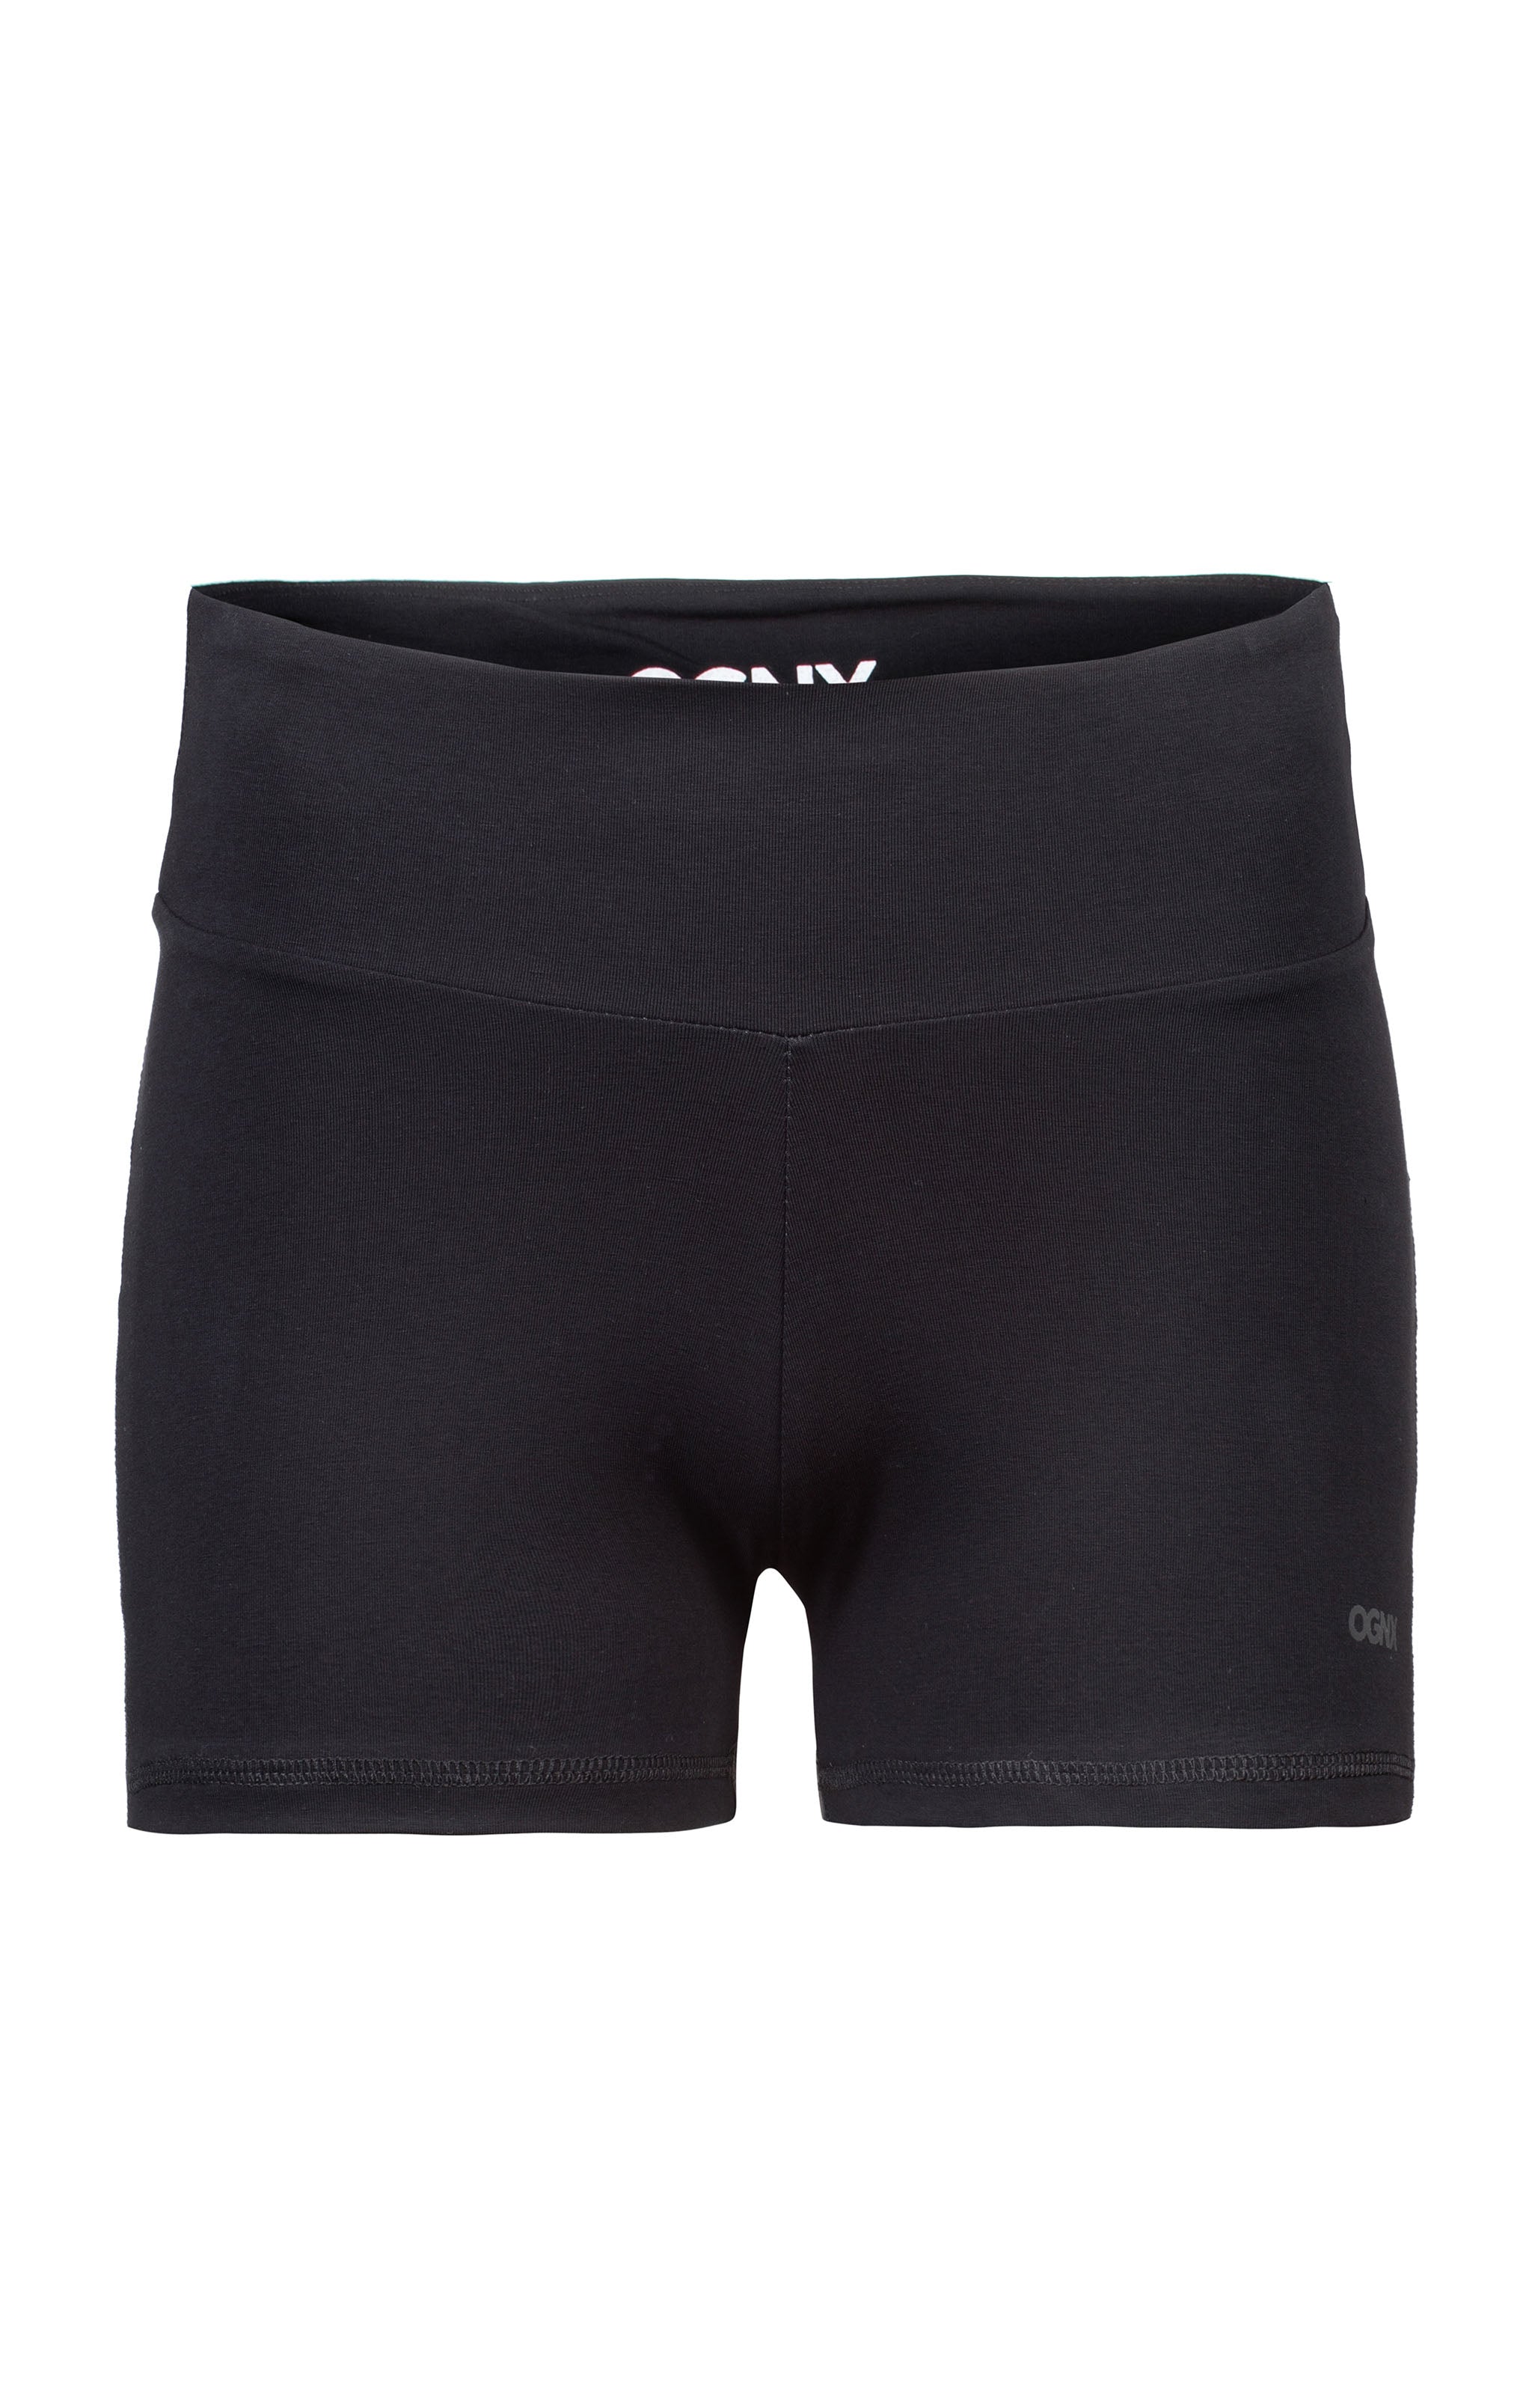 Hot Yoga: Sustainable Yoga Hot Pants from OGNX